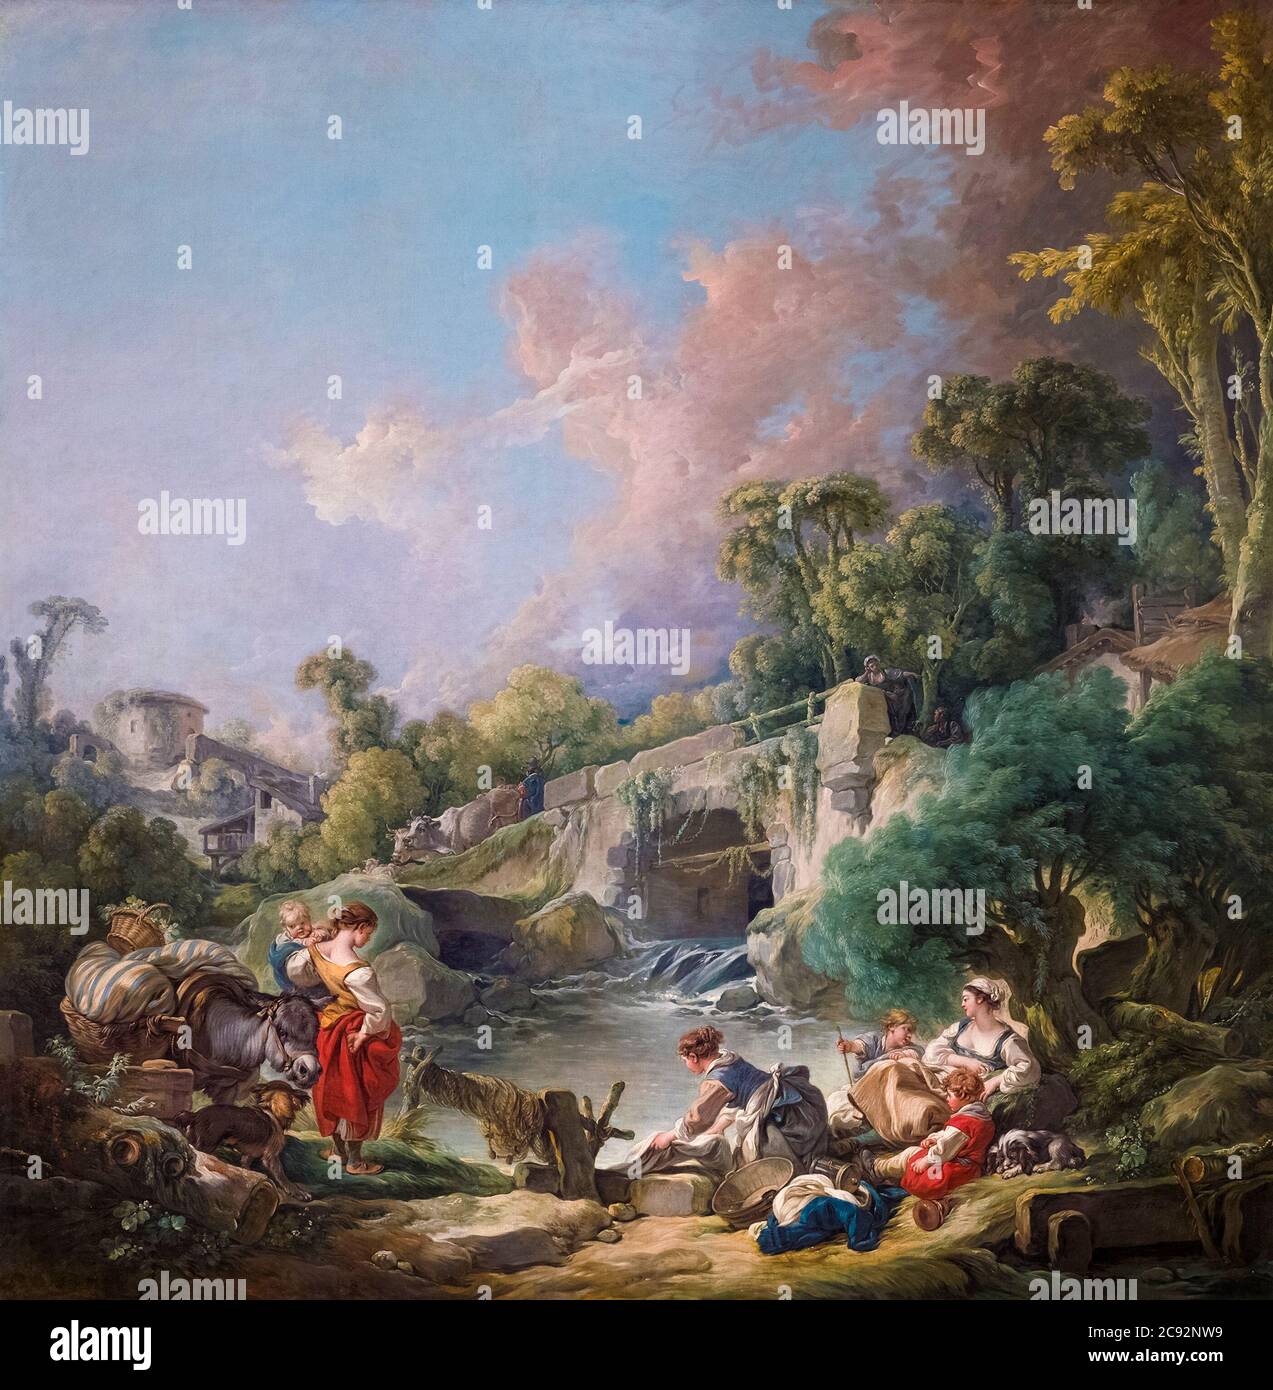 François Boucher, Washerwomen, 18th Century French Rococo painting, 1768 Banque D'Images